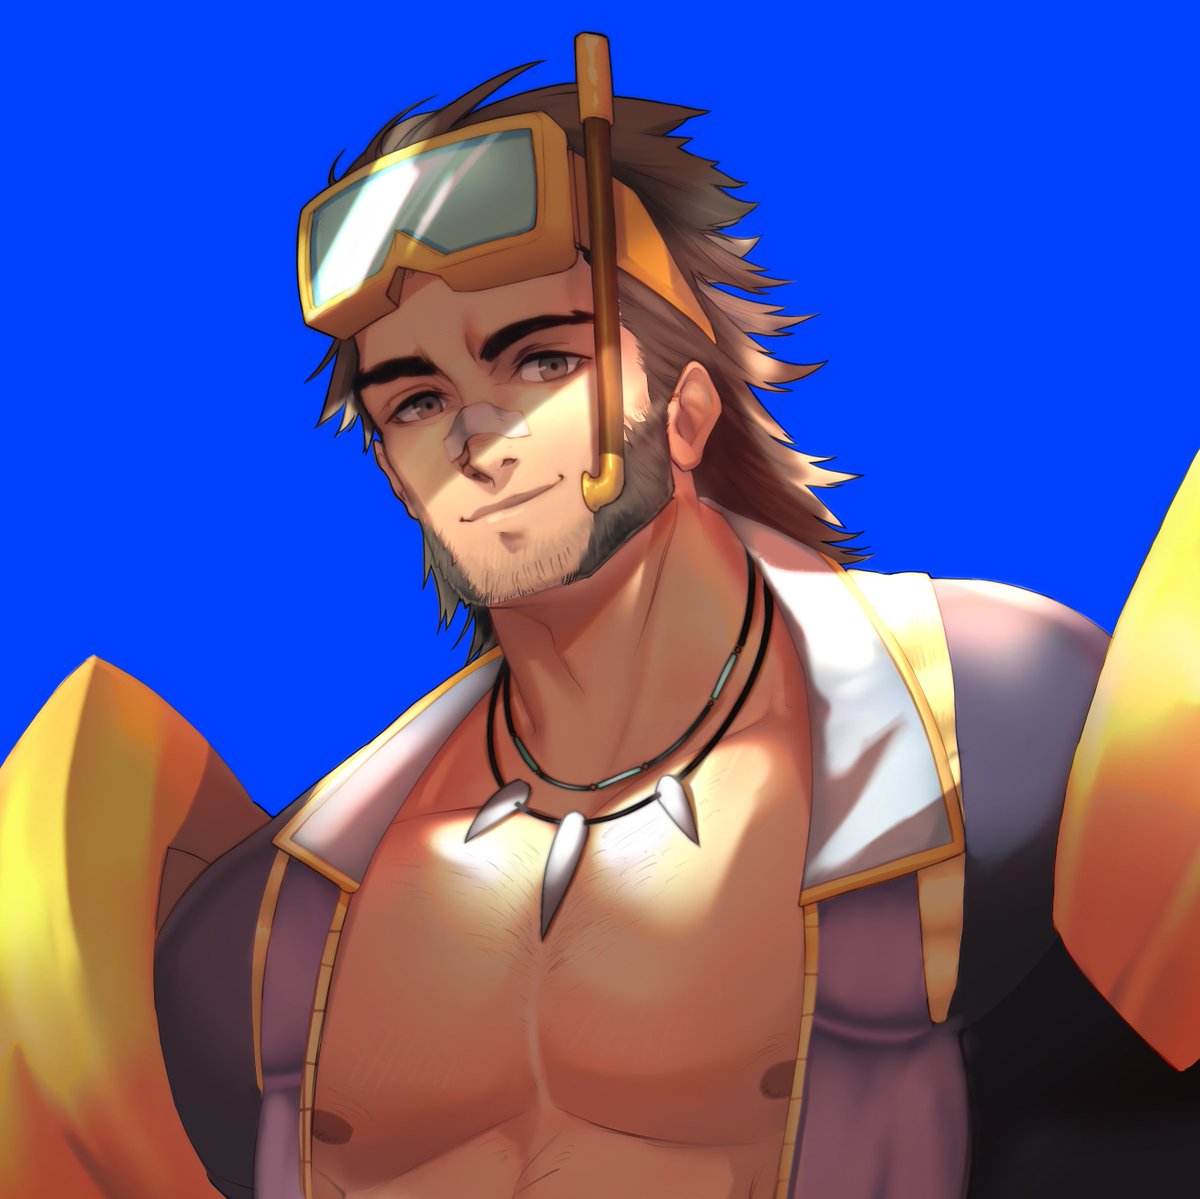 Alex Pool Party Jarvan Portrait Because He Looks Funny Also Tried Some Ligthning Stuff Lol Jarvaniv